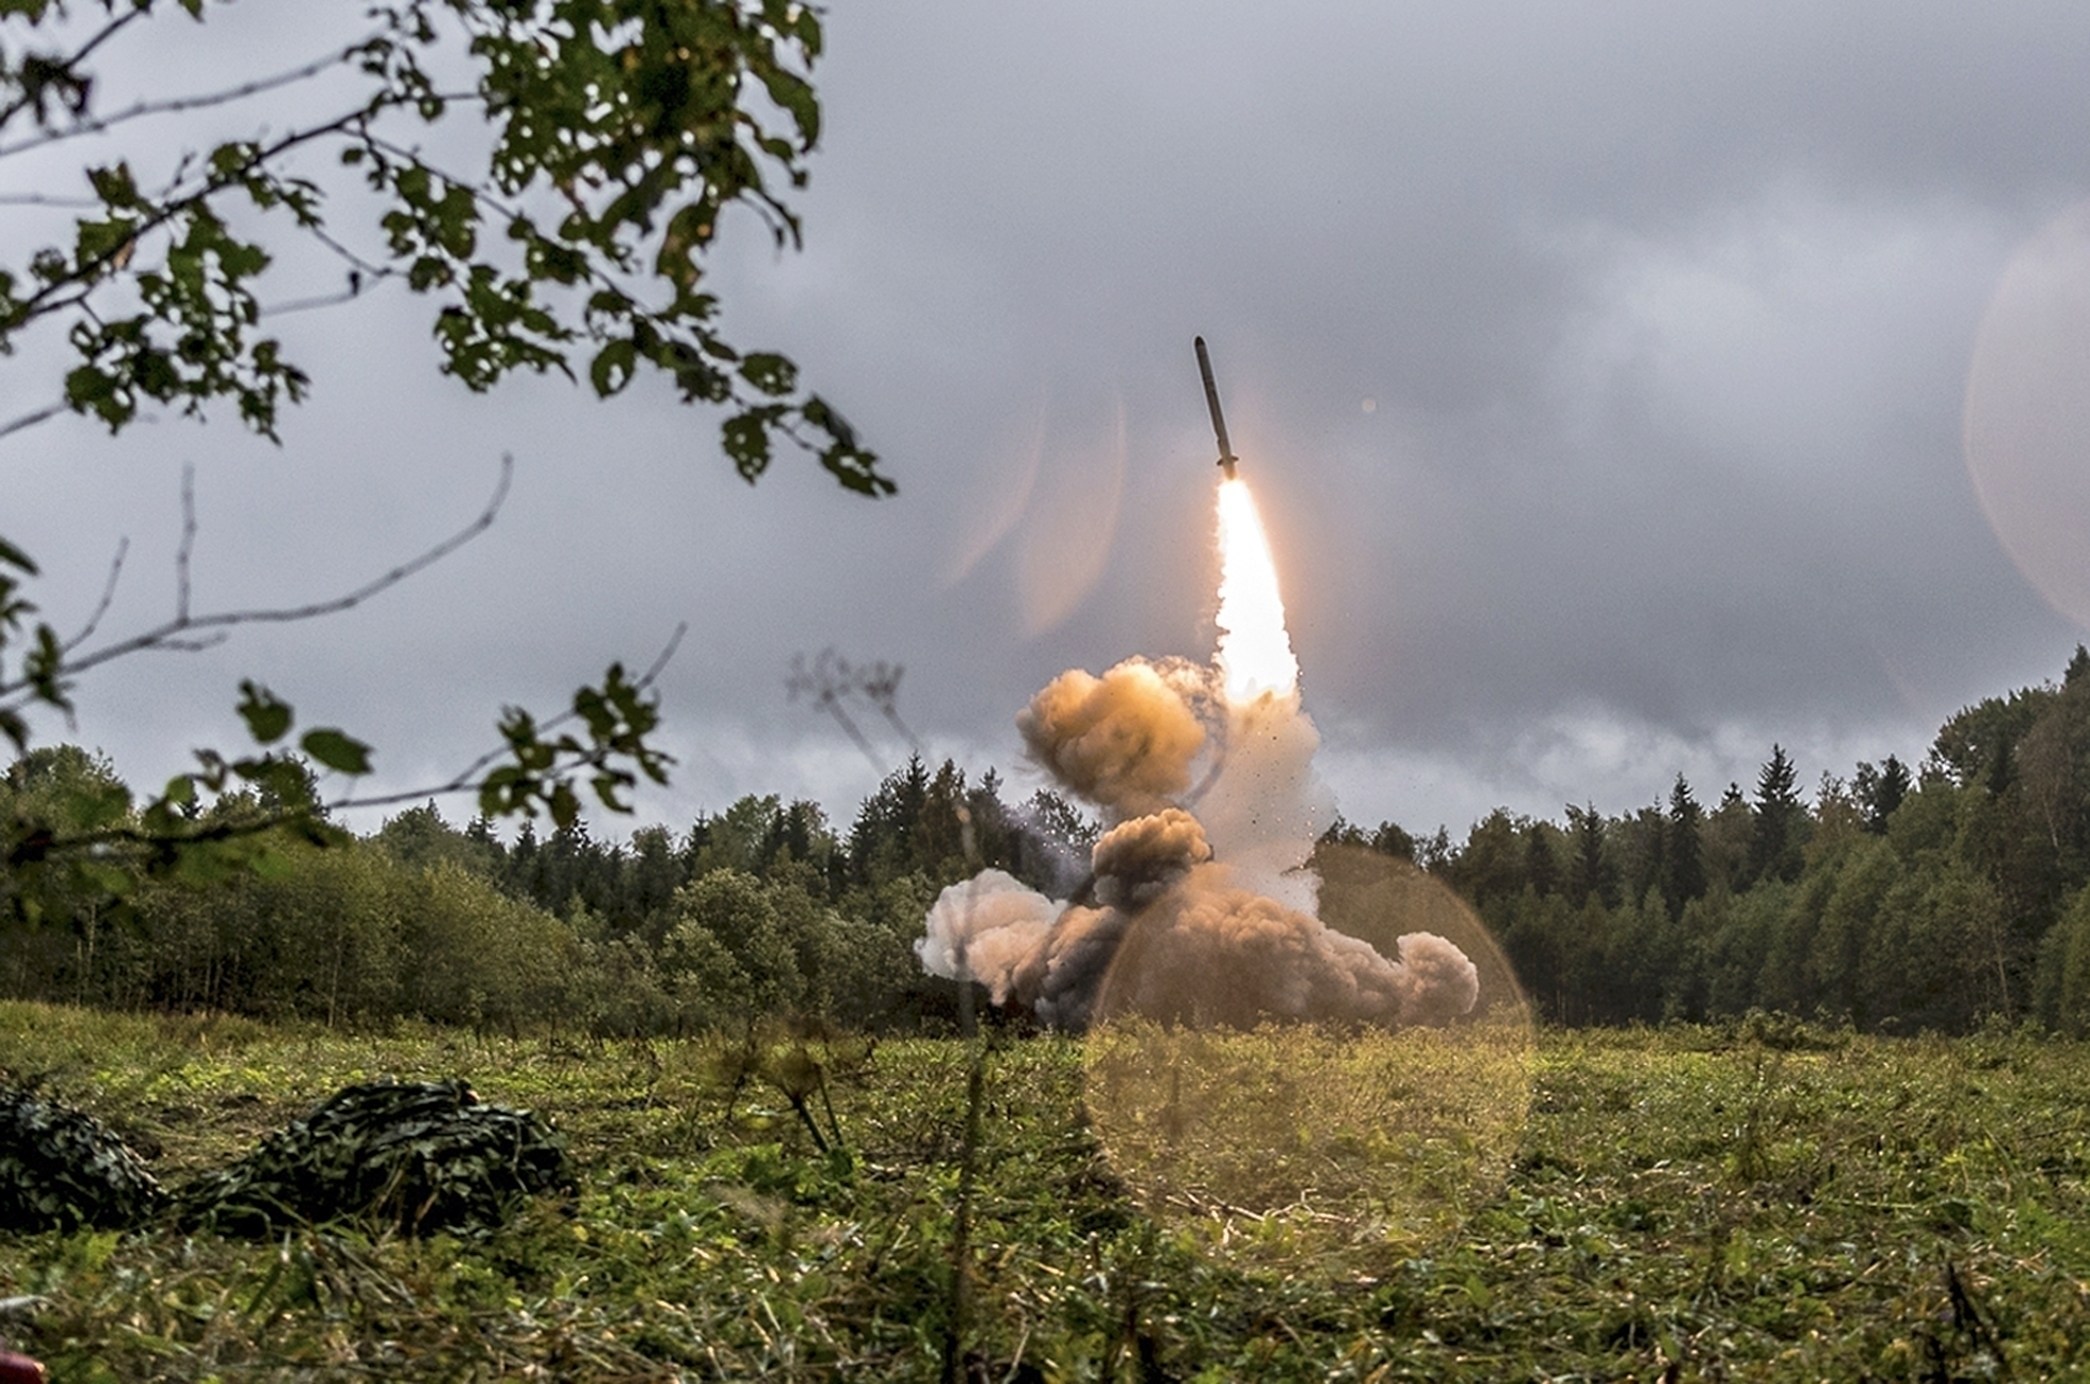 Russian Iskander short-range missile systems can be fitted with conventional or nuclear warheads. File photo: Russian Defence Ministry Press Service via AP